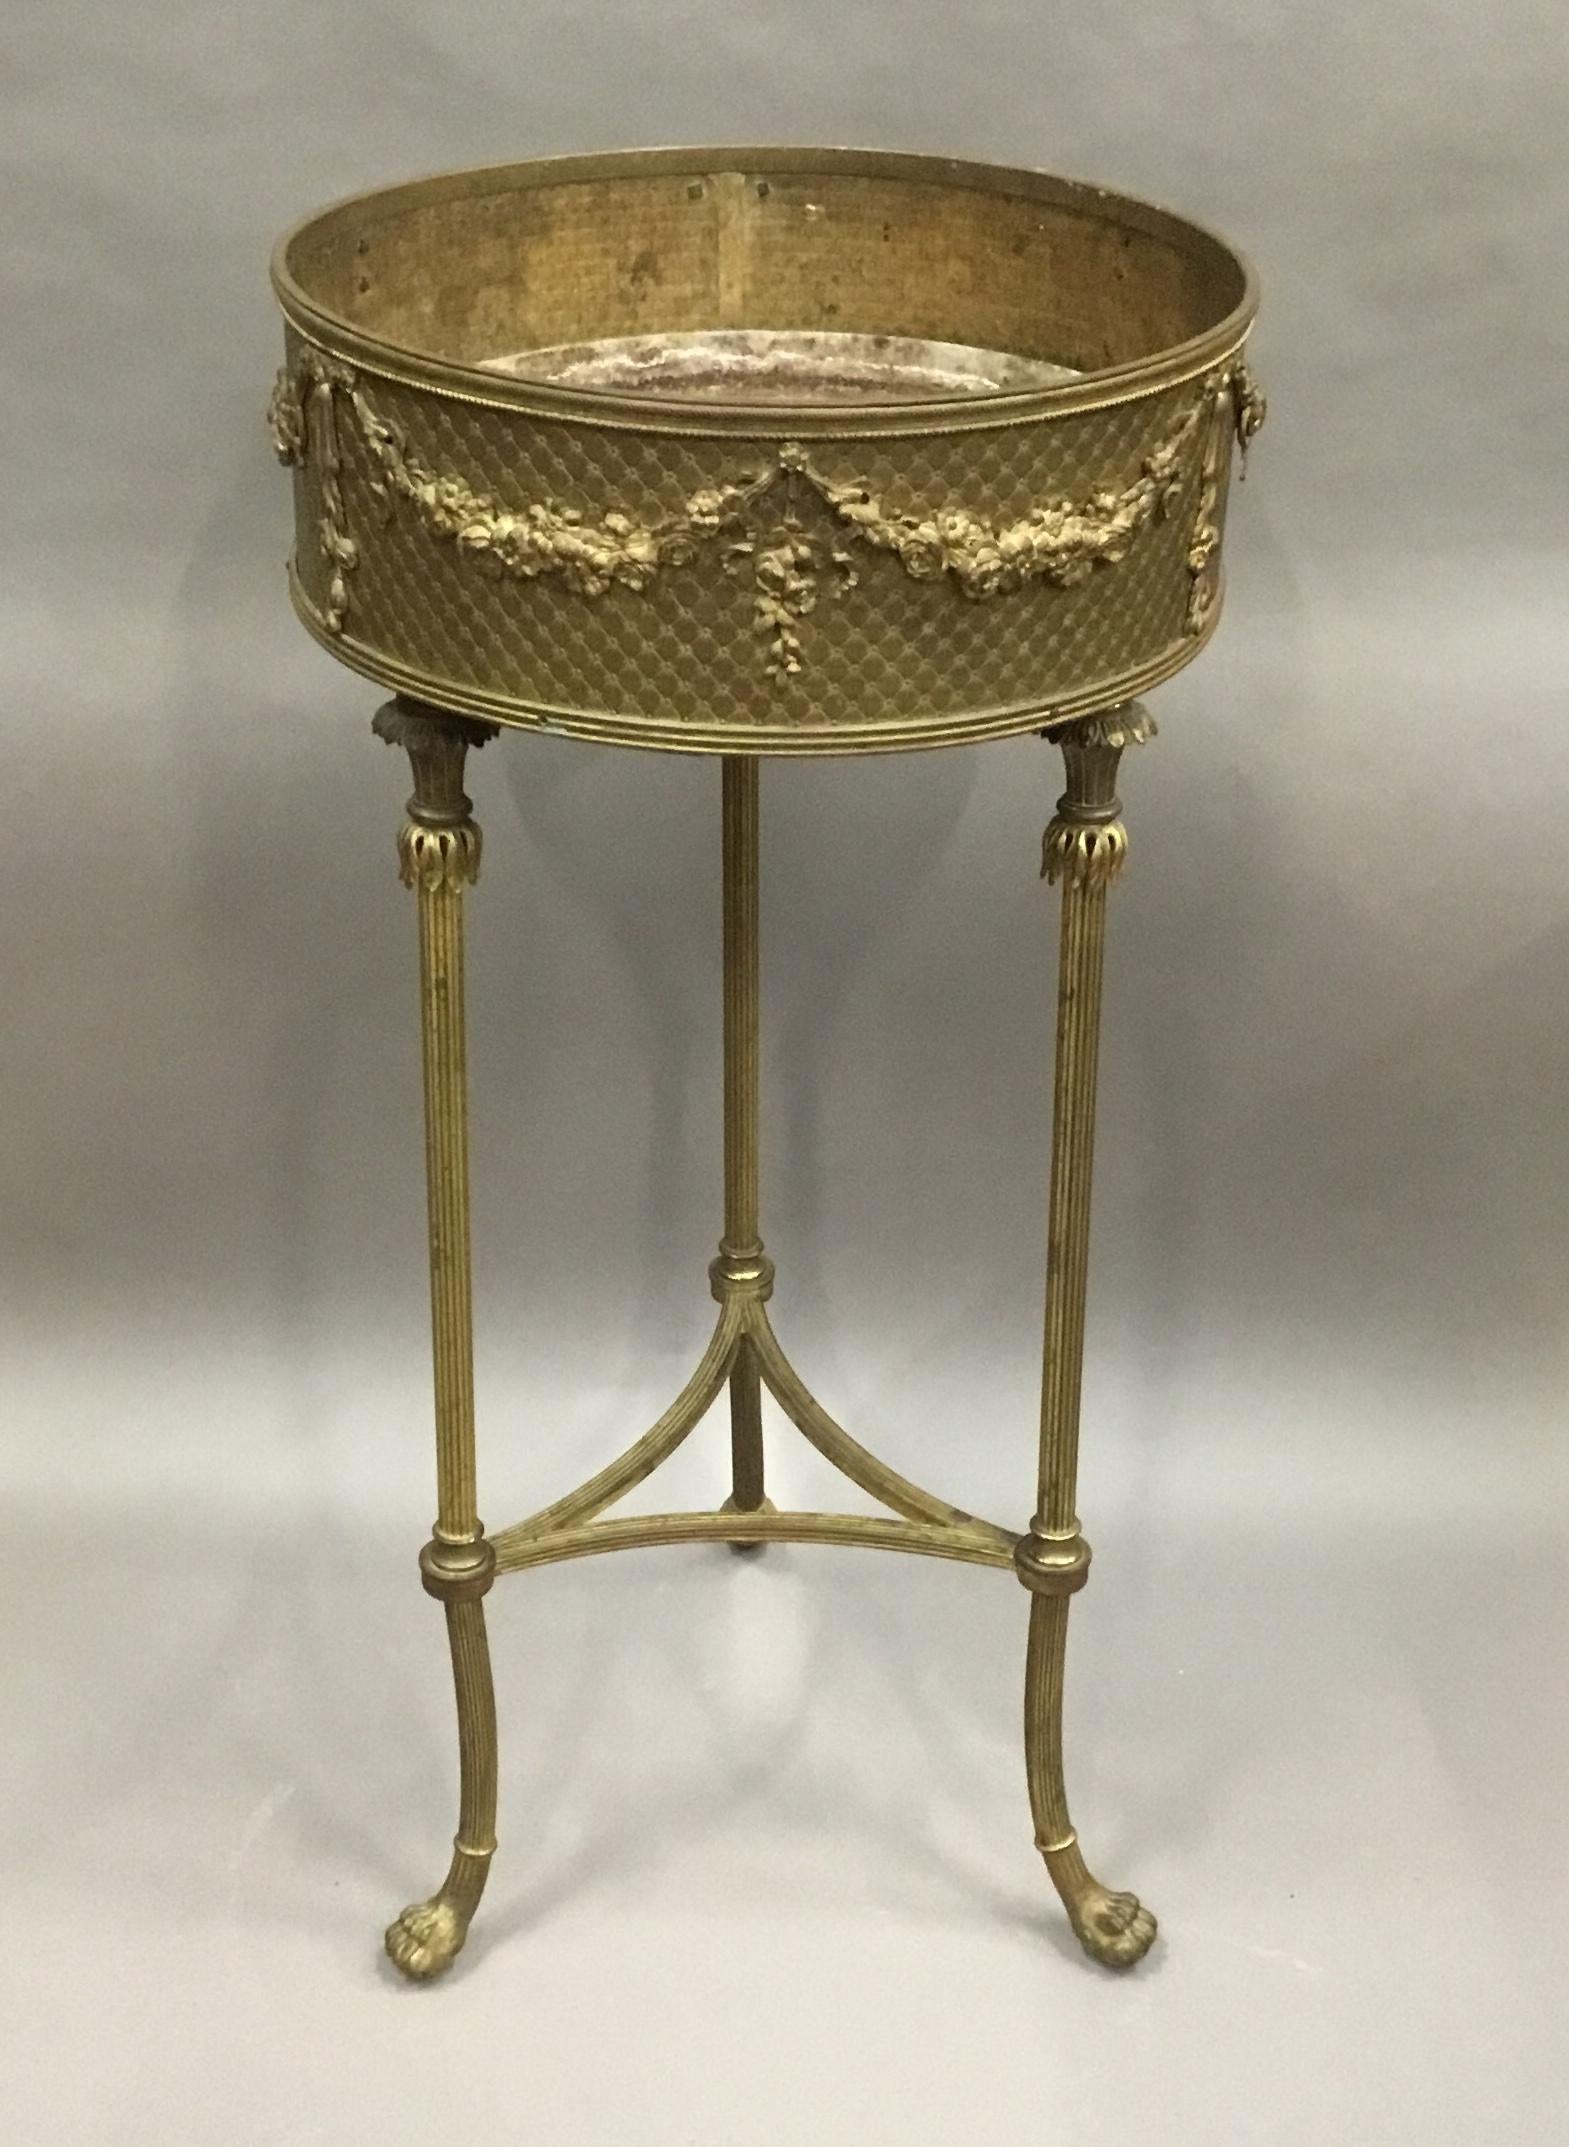 Impressive 19th century French gilt brass jardinière, the circular open top with a fine detailed moulded edge above ribbons and swags festooned with flowers on an unusual quilted trellis work background. Raised on elegant reeded supports, headed